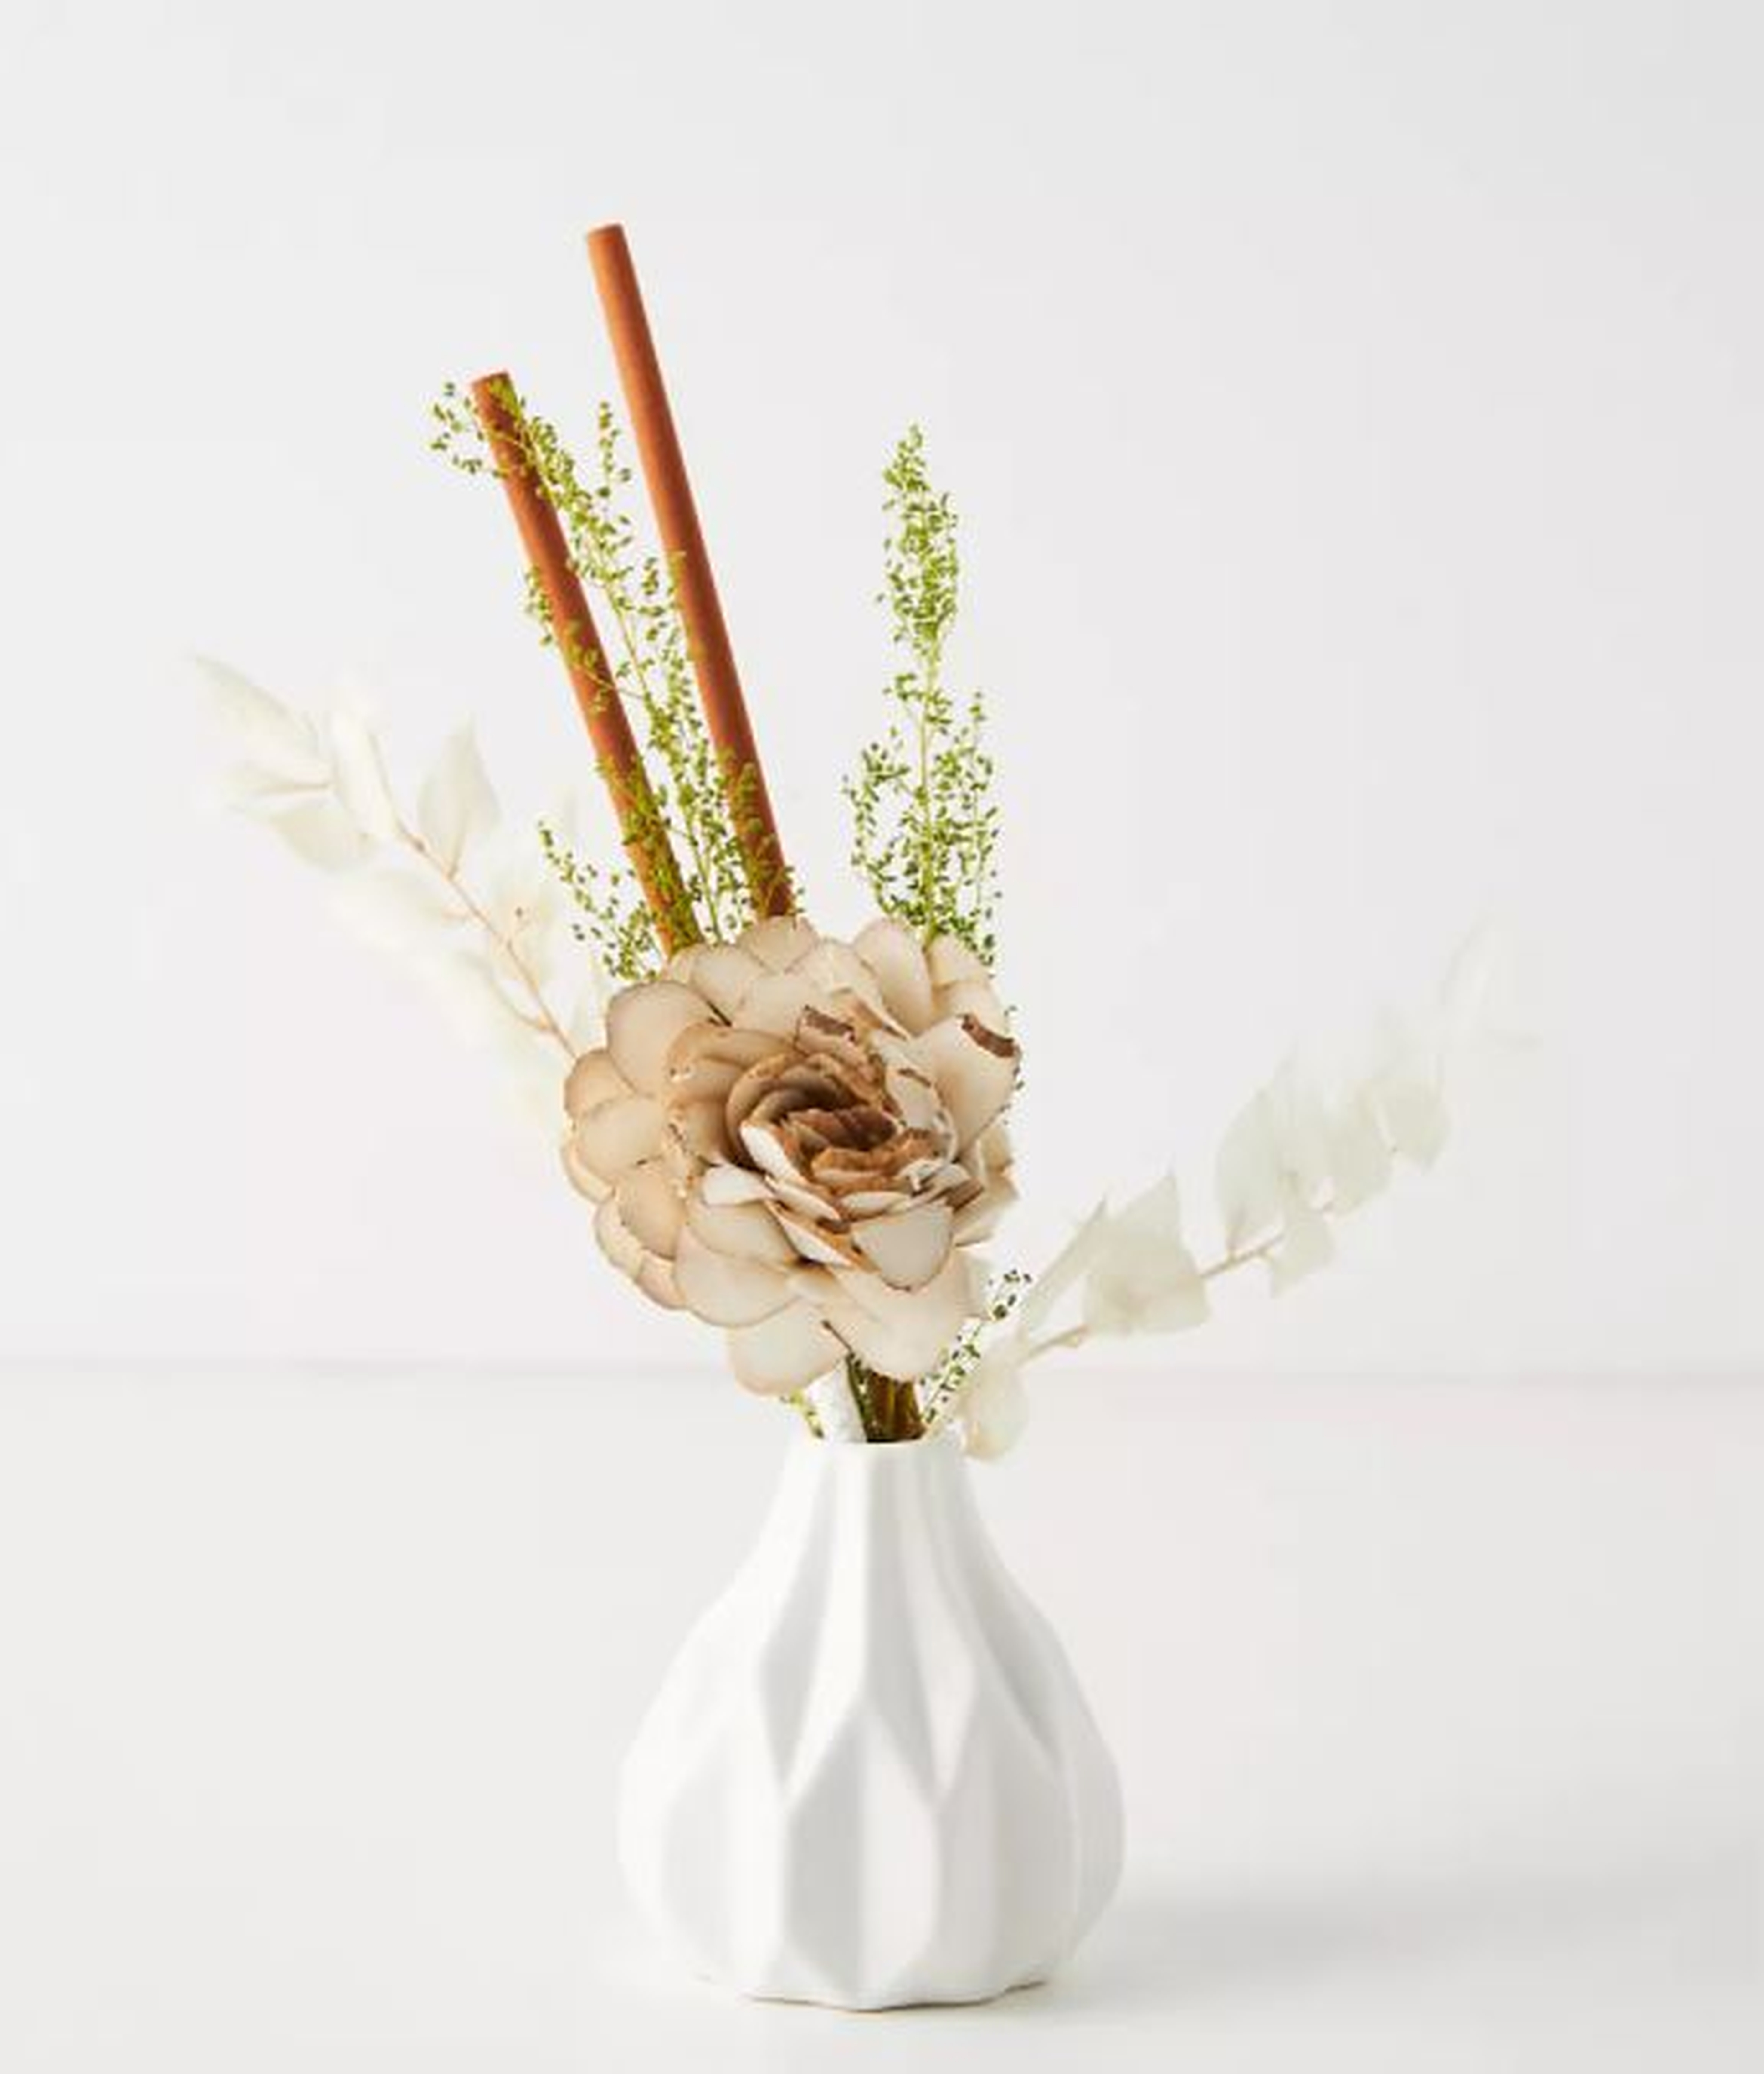 Floral Bouquet Ceramic Diffuser By Anthropologie in White - Anthropologie